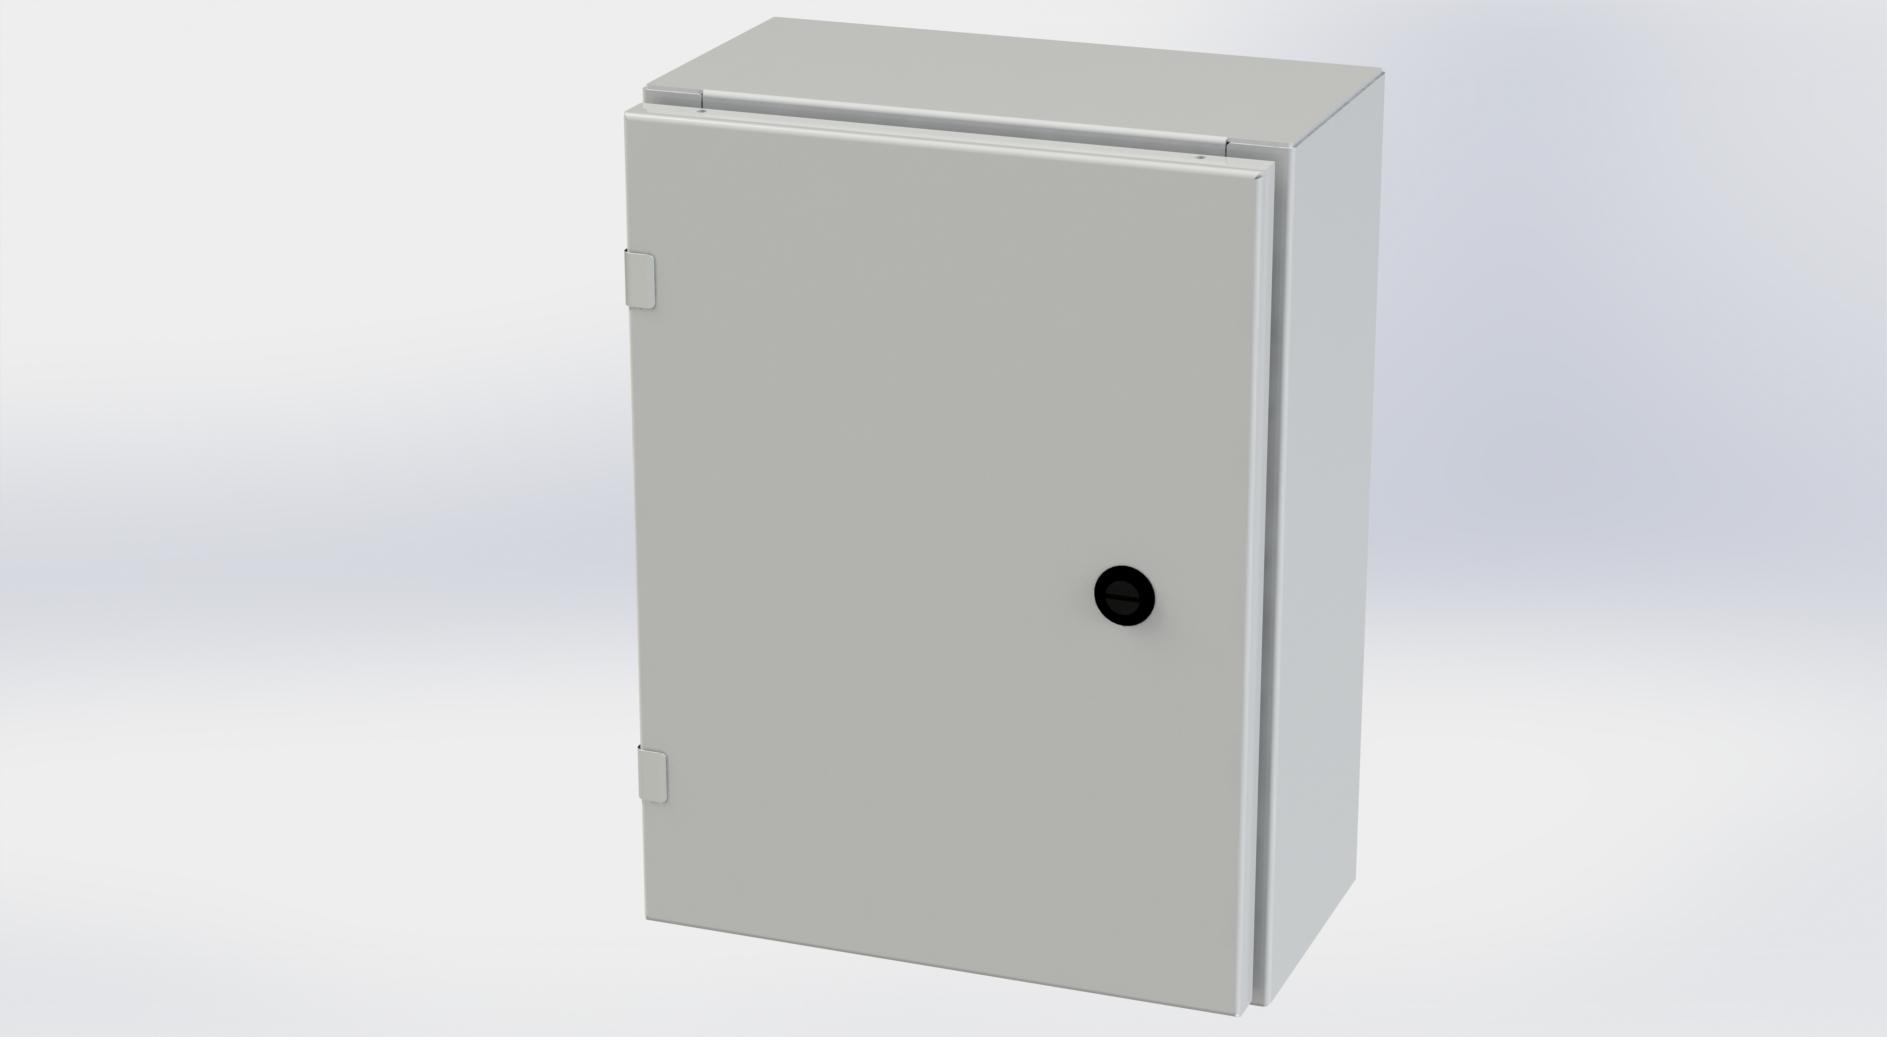 Saginaw Control SCE-16EL1206LPLG EL Enclosure, Height:16.00", Width:12.00", Depth:6.00", RAL 7035 gray powder coating inside and out. Optional sub-panels are powder coated white.